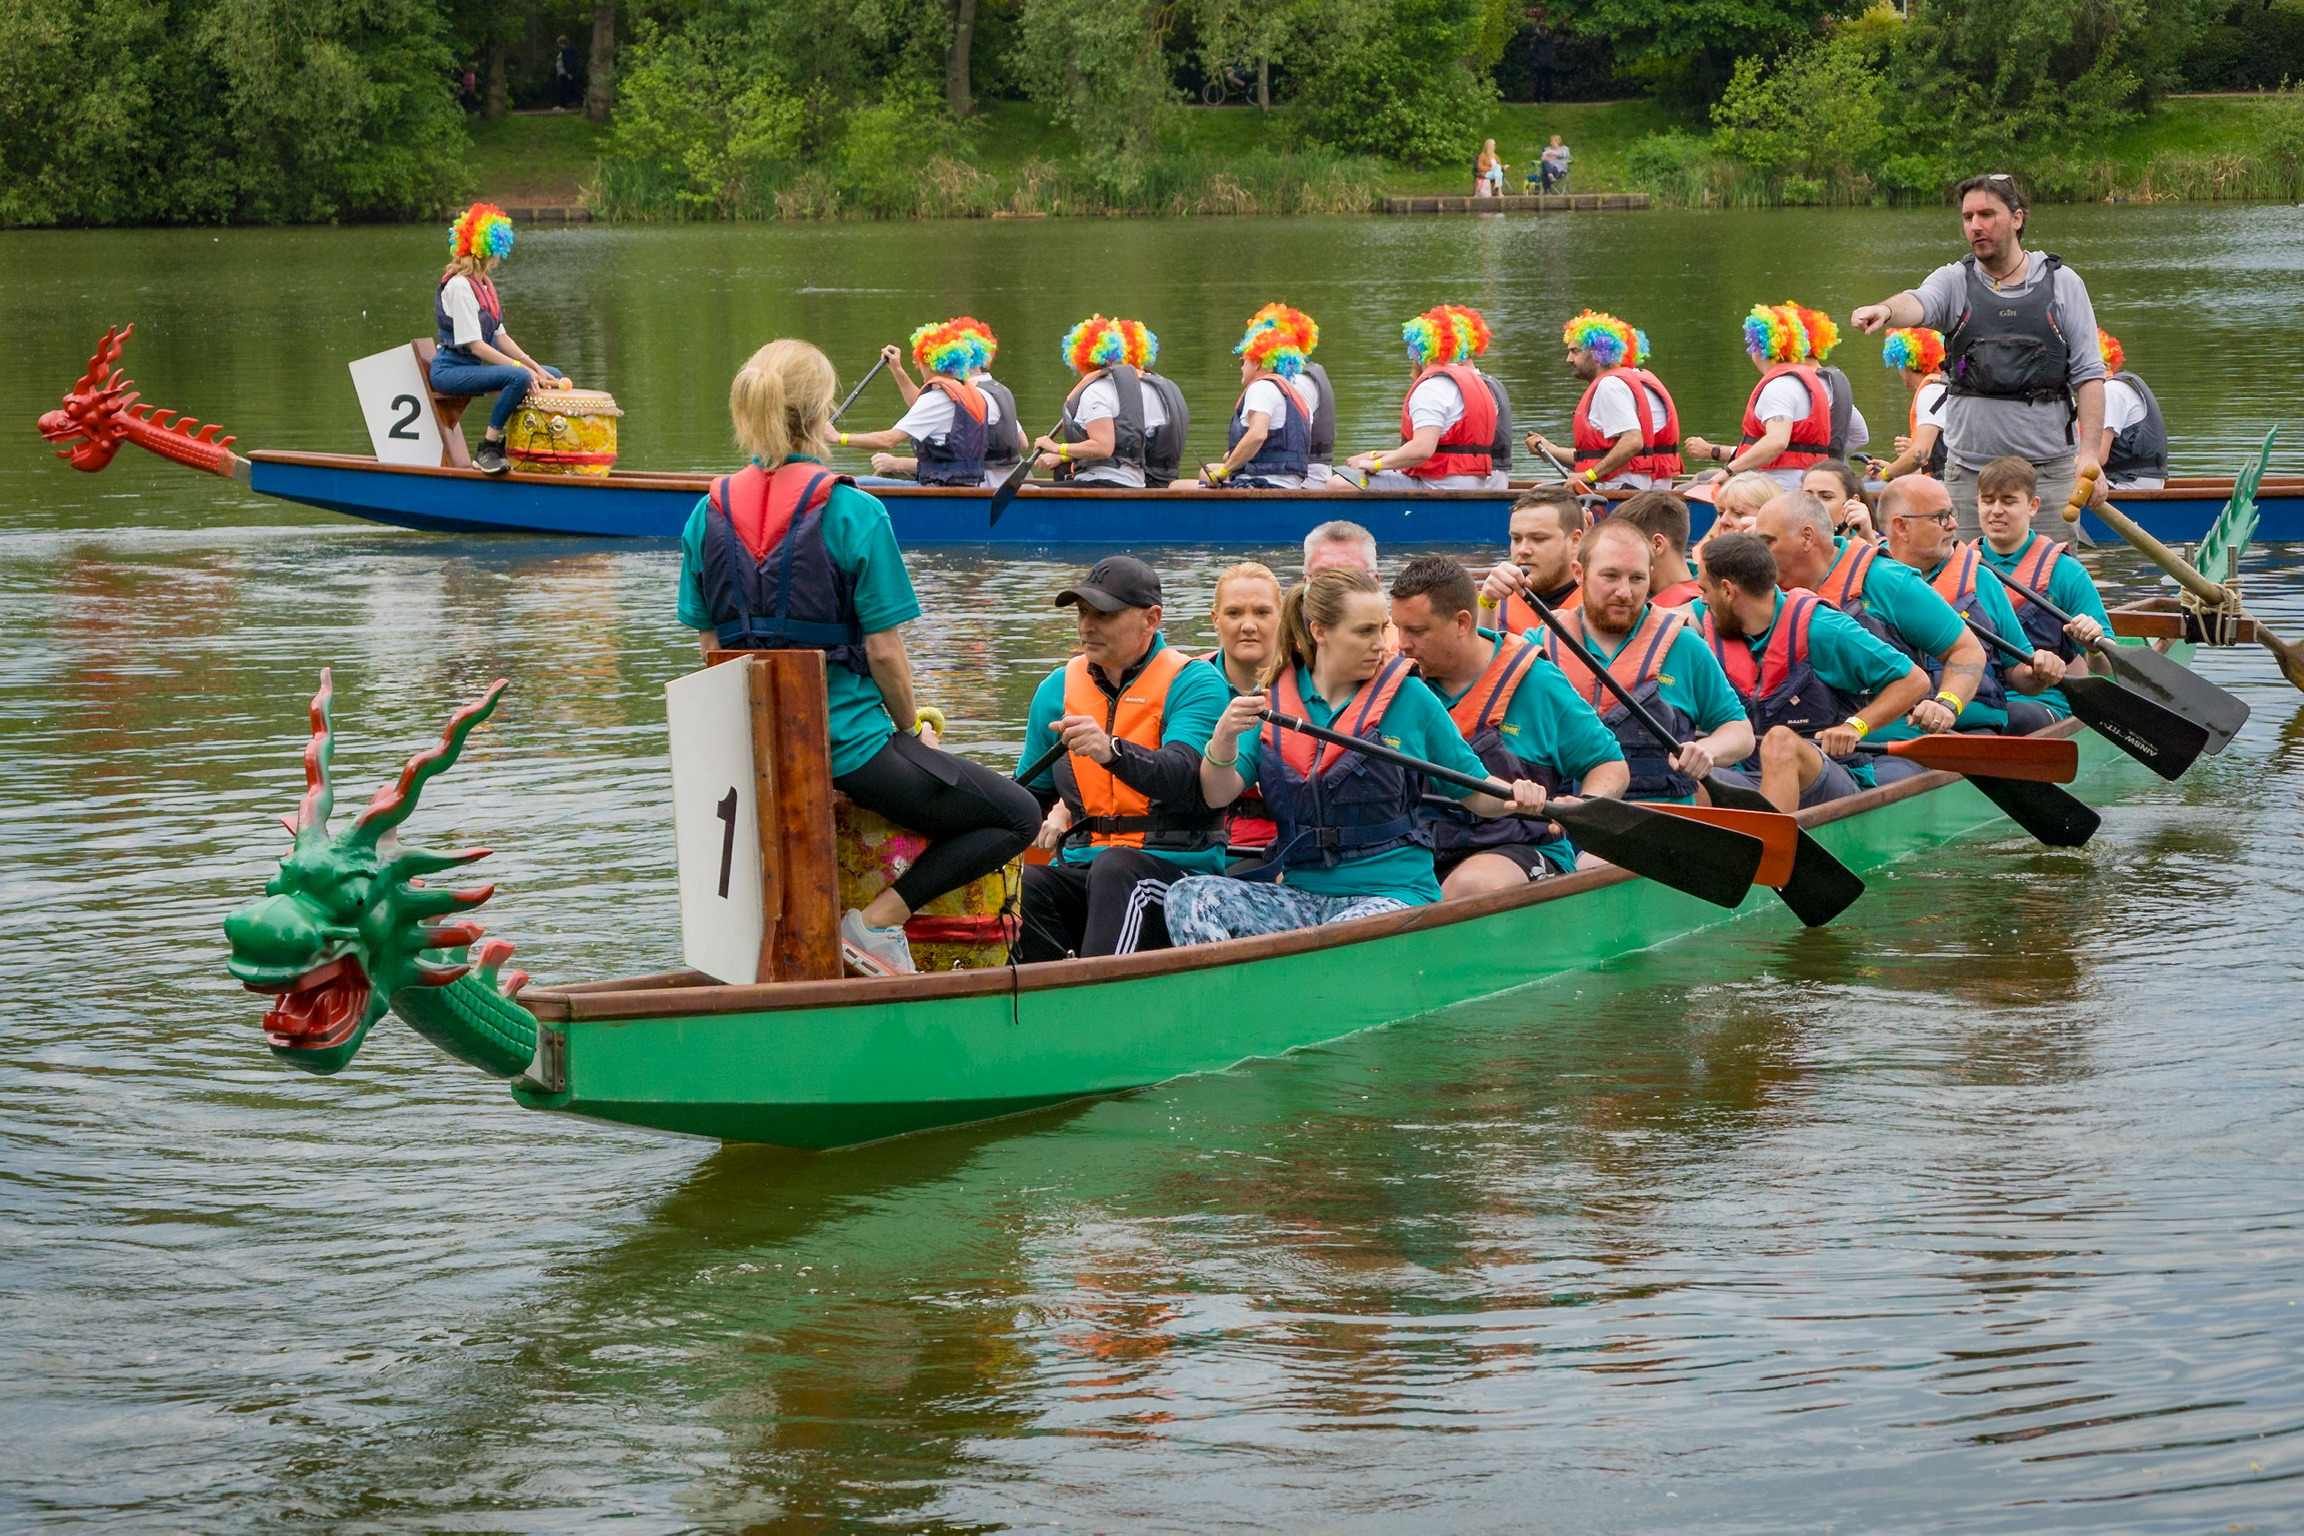 The Trident Otters in their Dragon Boat